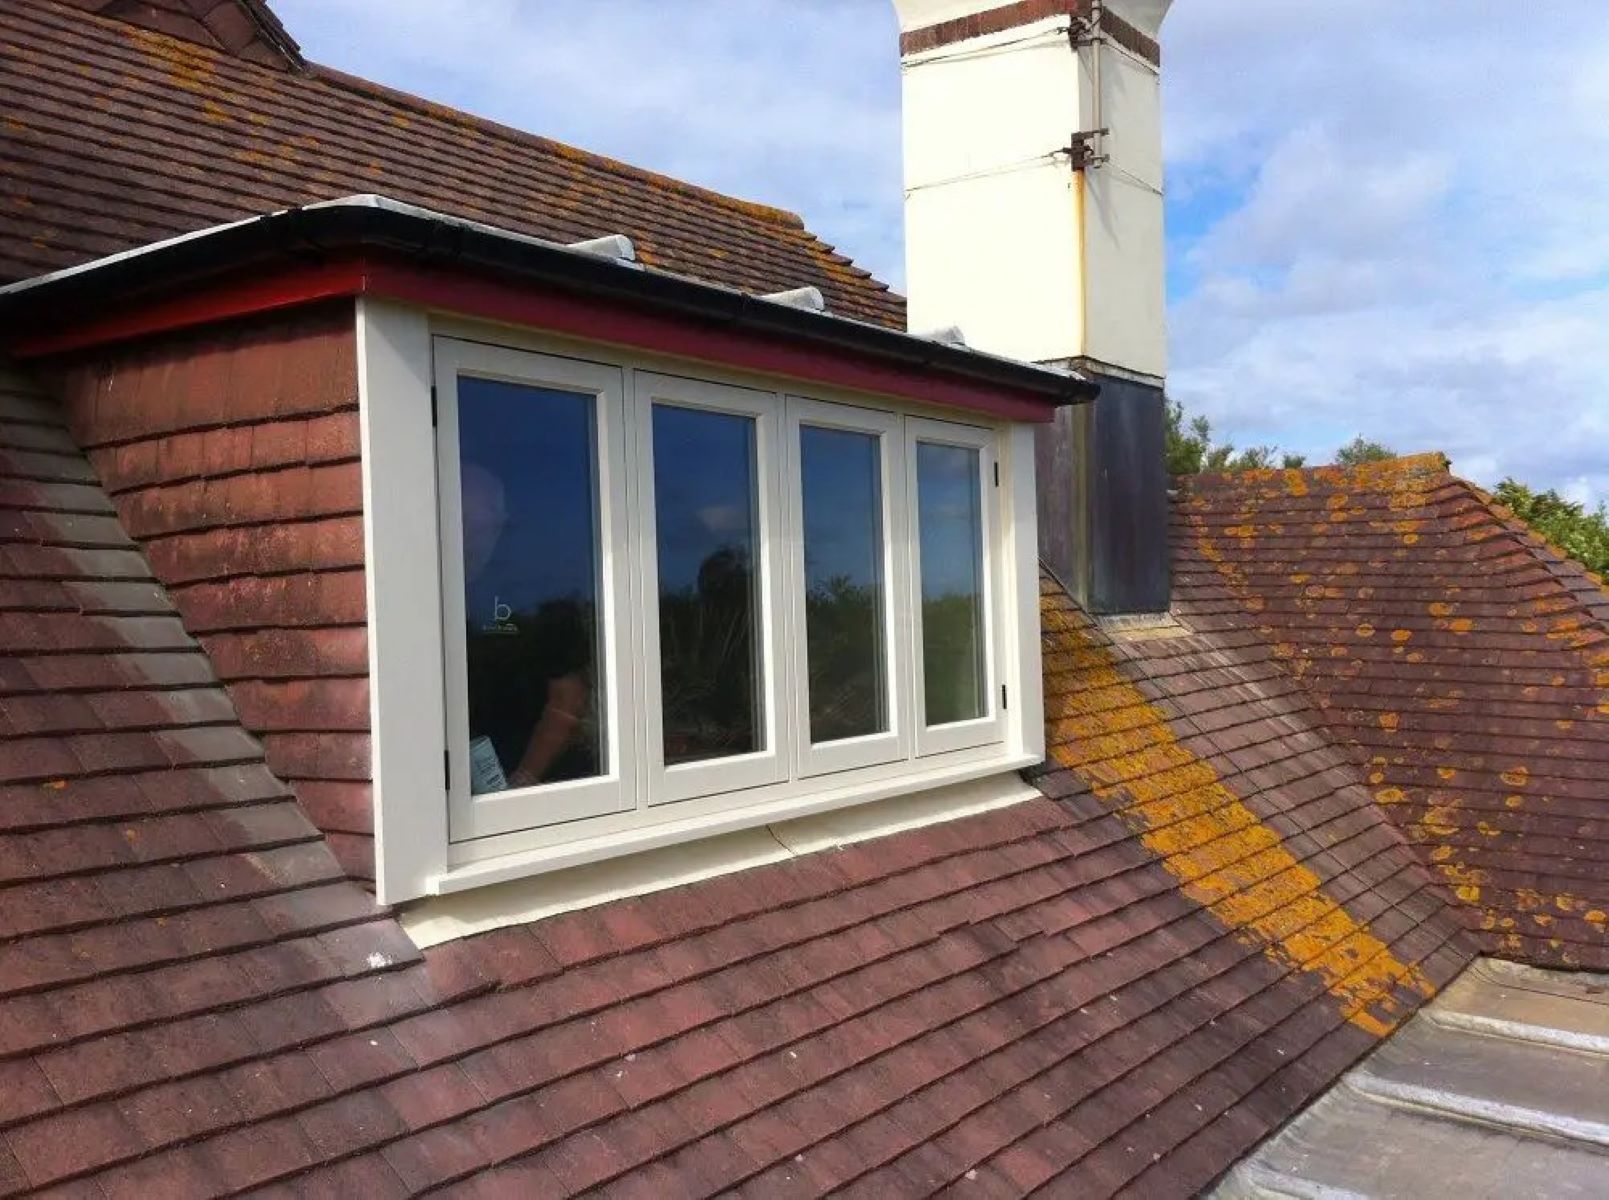 How To Add A Dormer To An Existing Roof